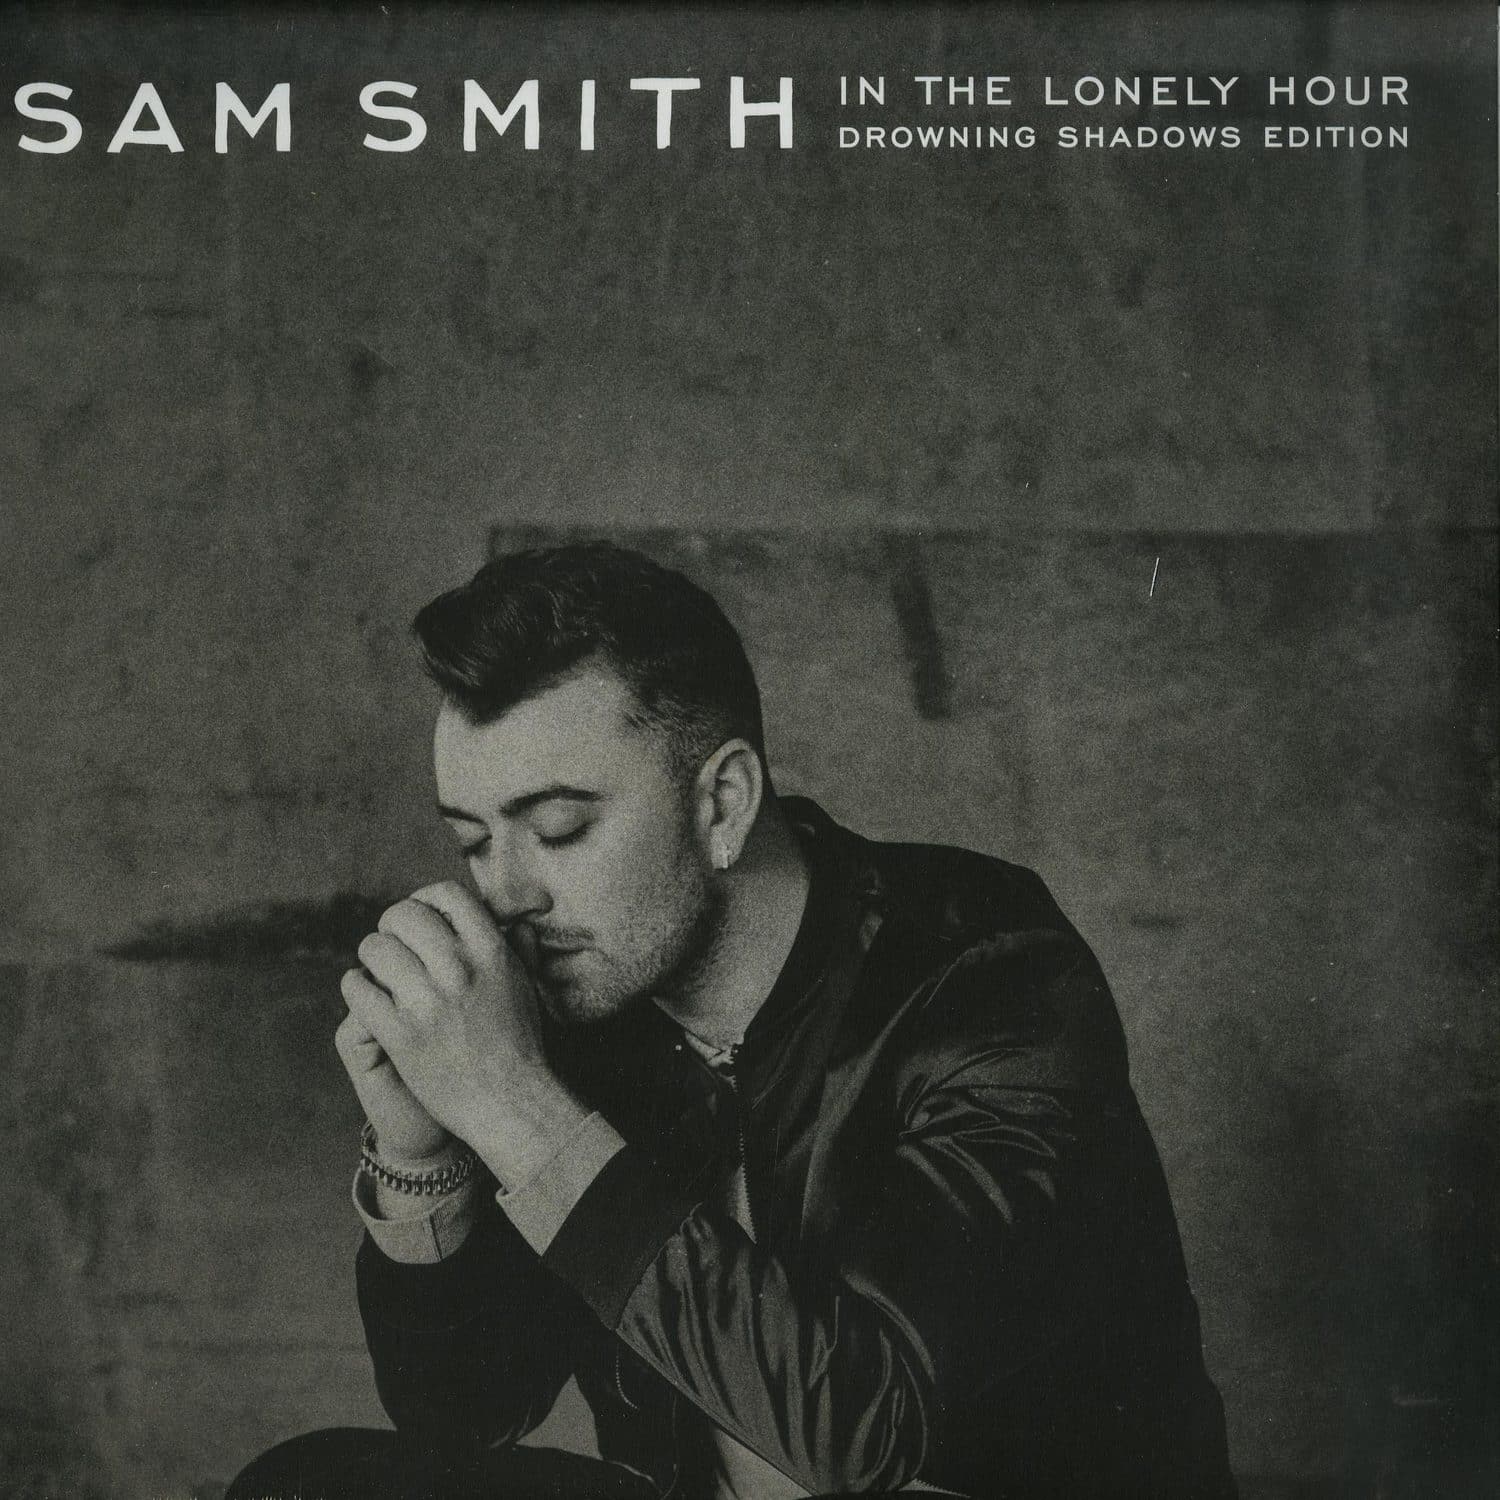 sam smith in the lonely hour drowing shadows